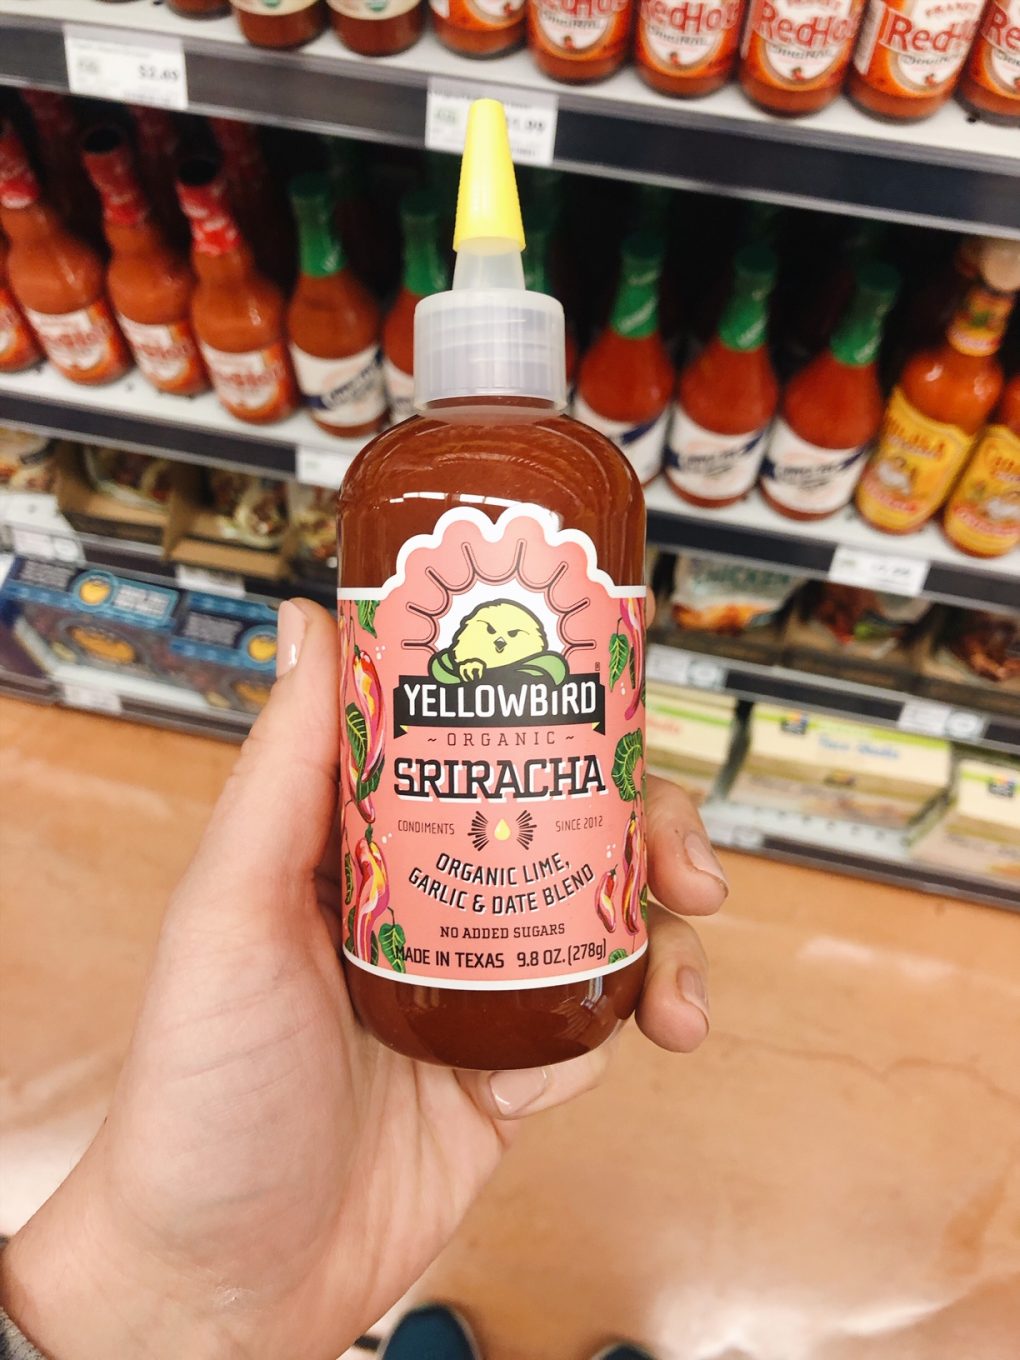 Holding a bottle of yellow bird brand sriracha hot sauce in a grocery store aisle